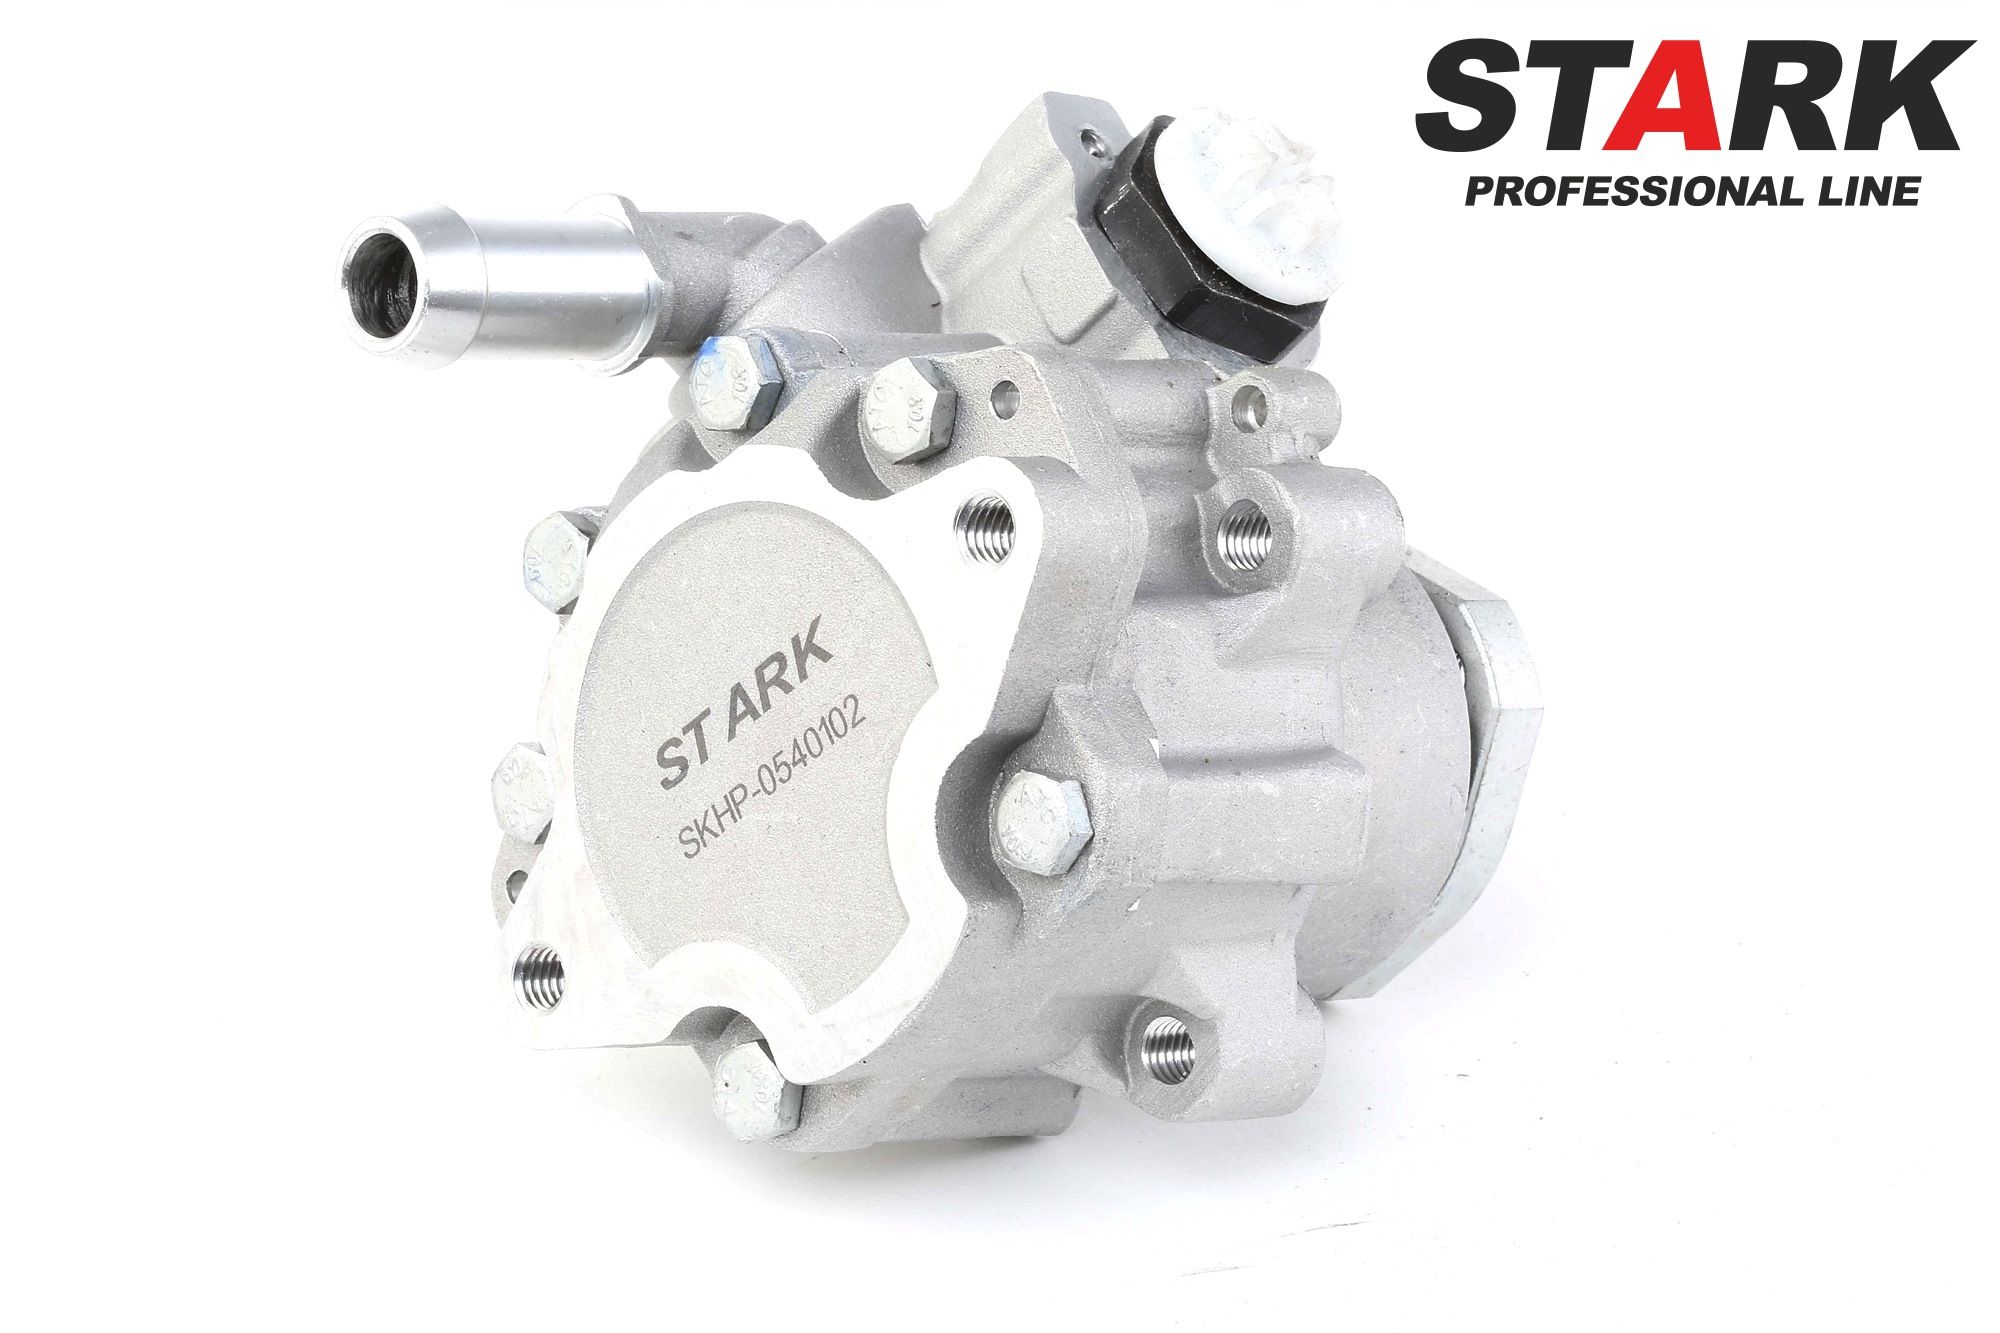 STARK SKHP-0540102 Power steering pump Hydraulic, 75,0 bar, VW 3-loch, for left-hand/right-hand drive vehicles